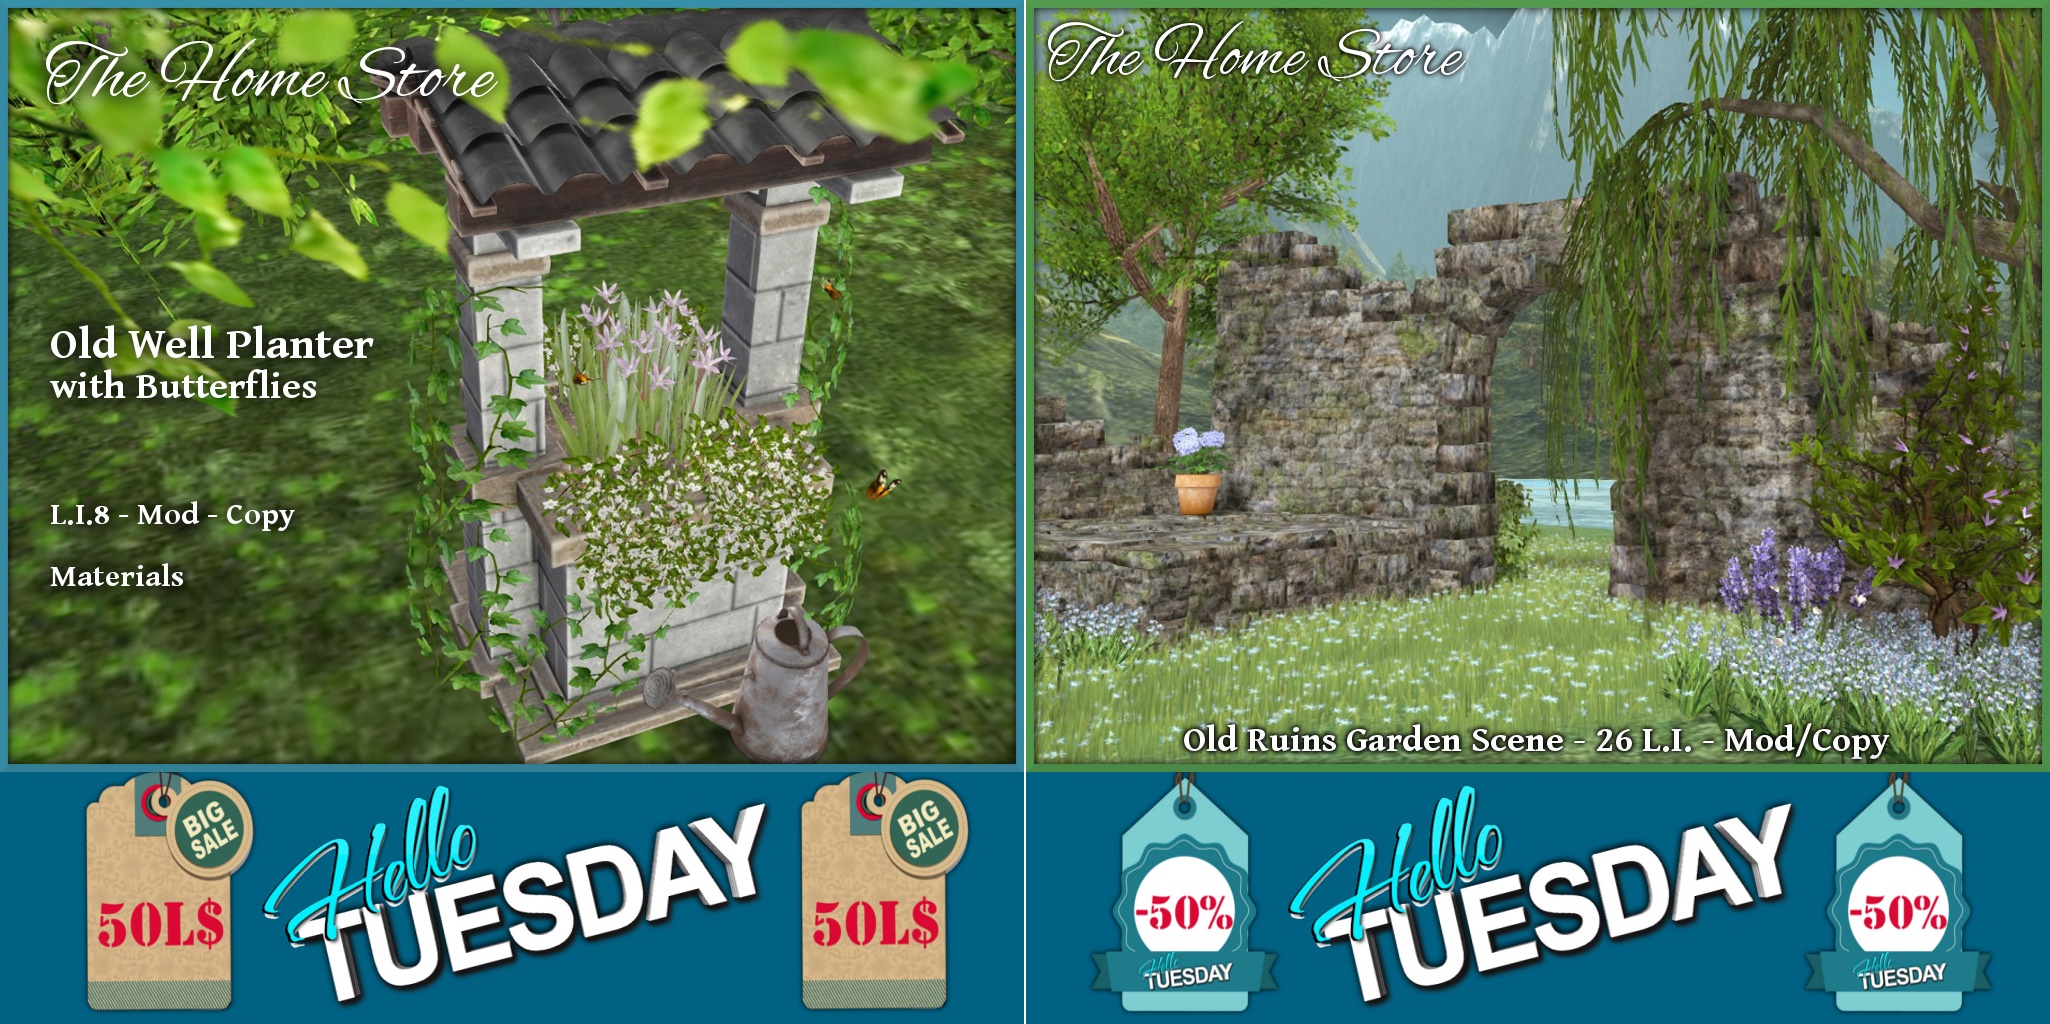 The Home Store – Old Well Planter & Old Ruins Garden